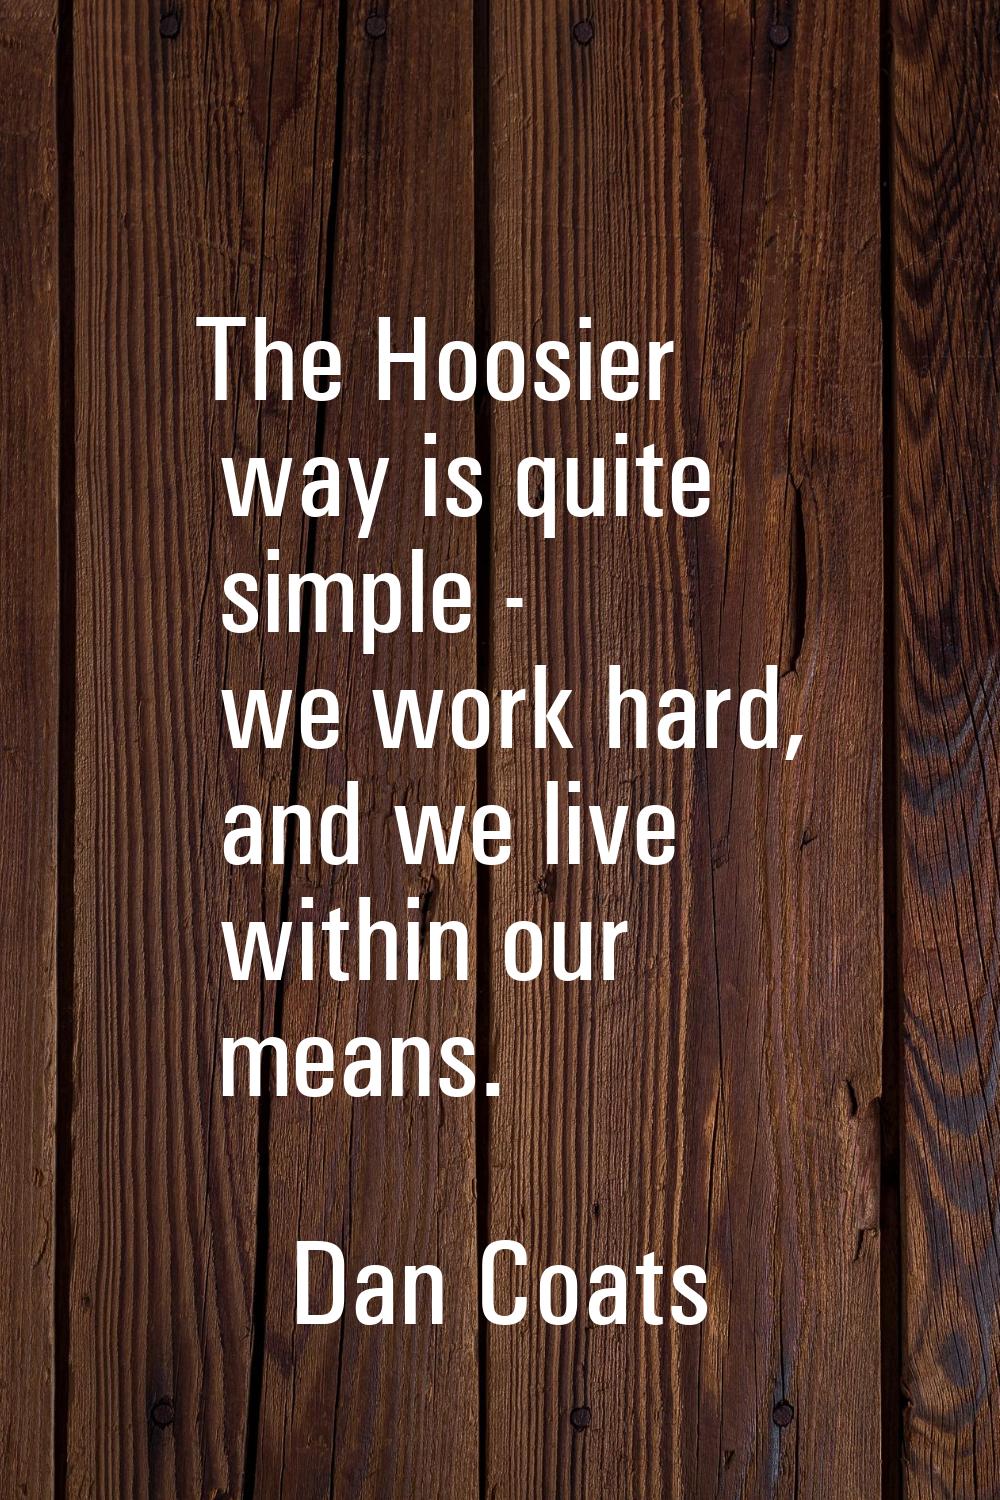 The Hoosier way is quite simple - we work hard, and we live within our means.